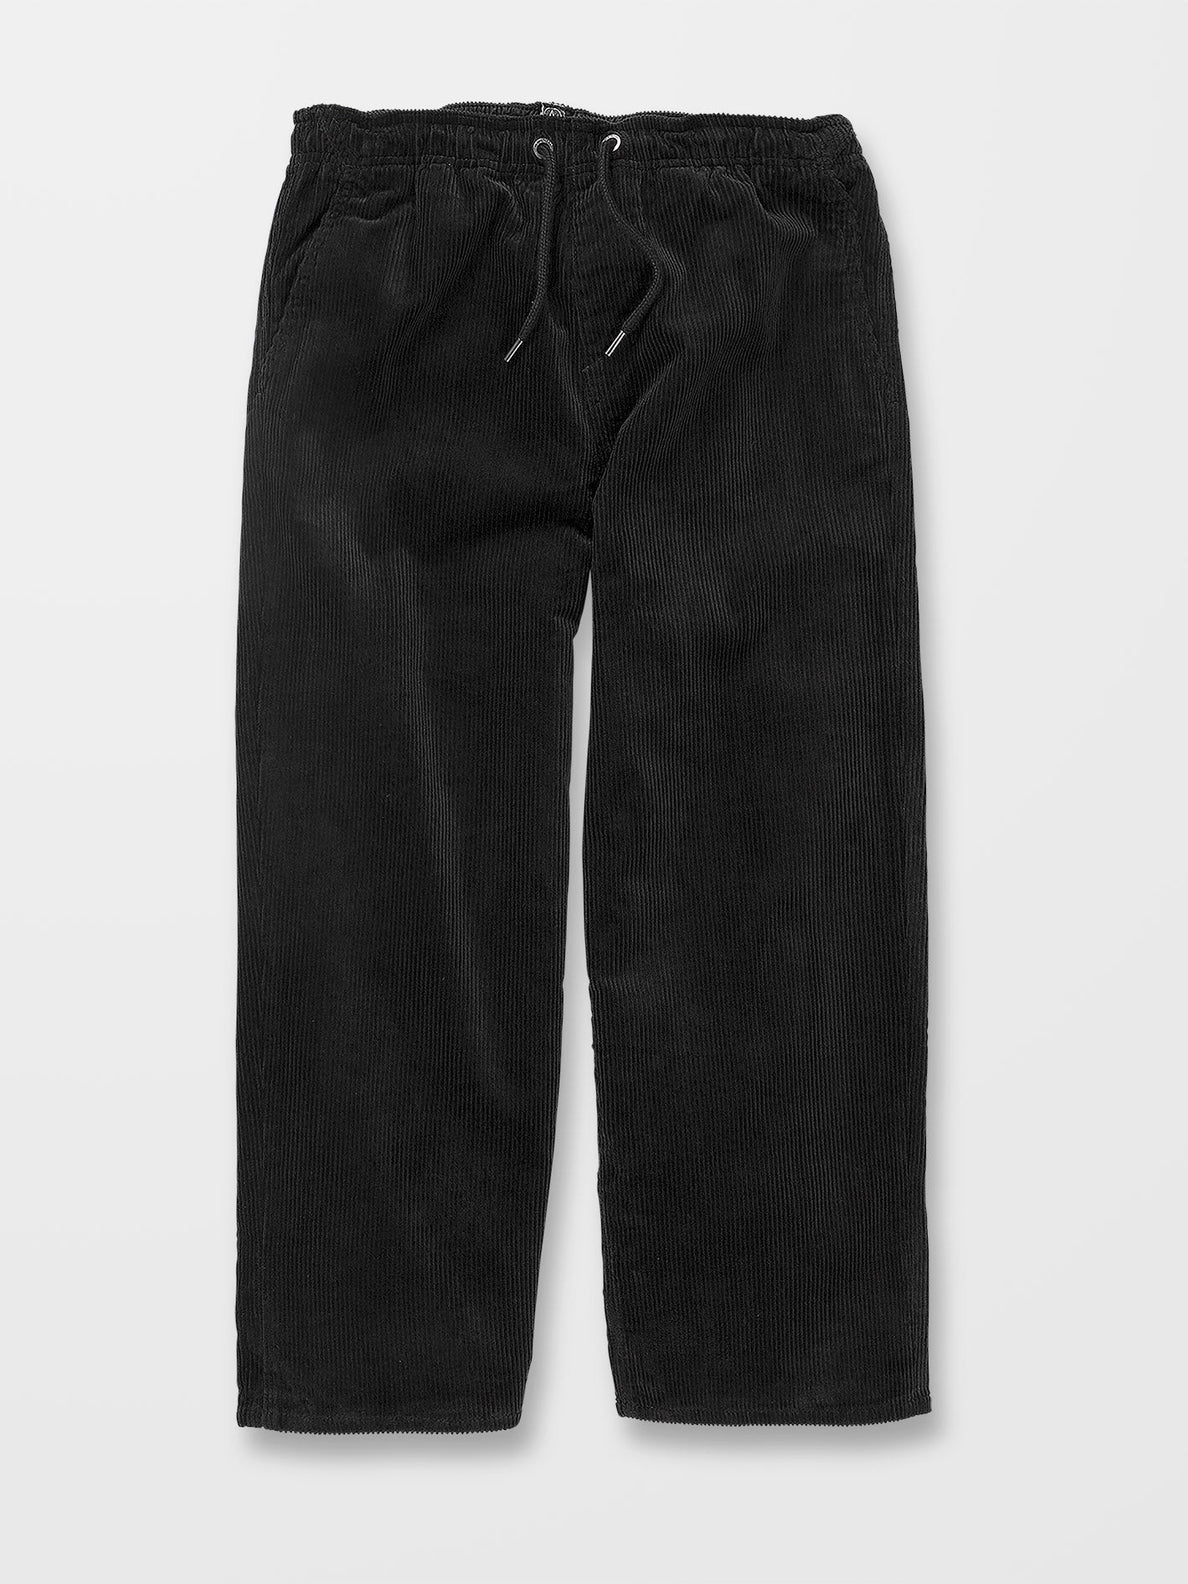 Outer Spaced Trousers - NEW BLACK - (KIDS) (C1232232_NBK) [F]